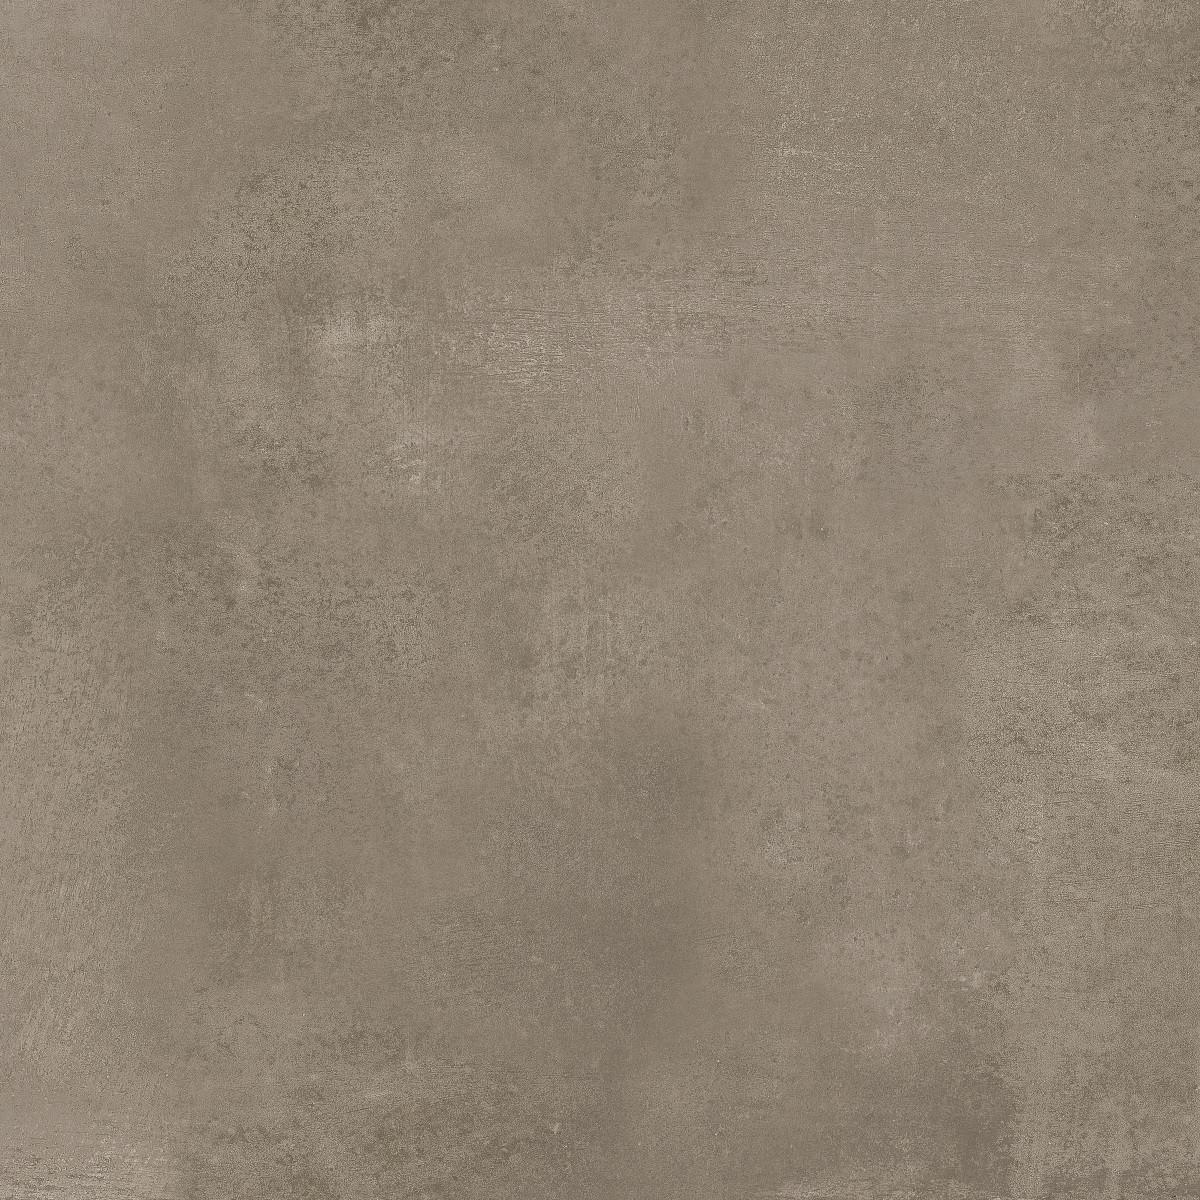 CEMENT GREY RECT. 60X60 - 1.44 m² - 6